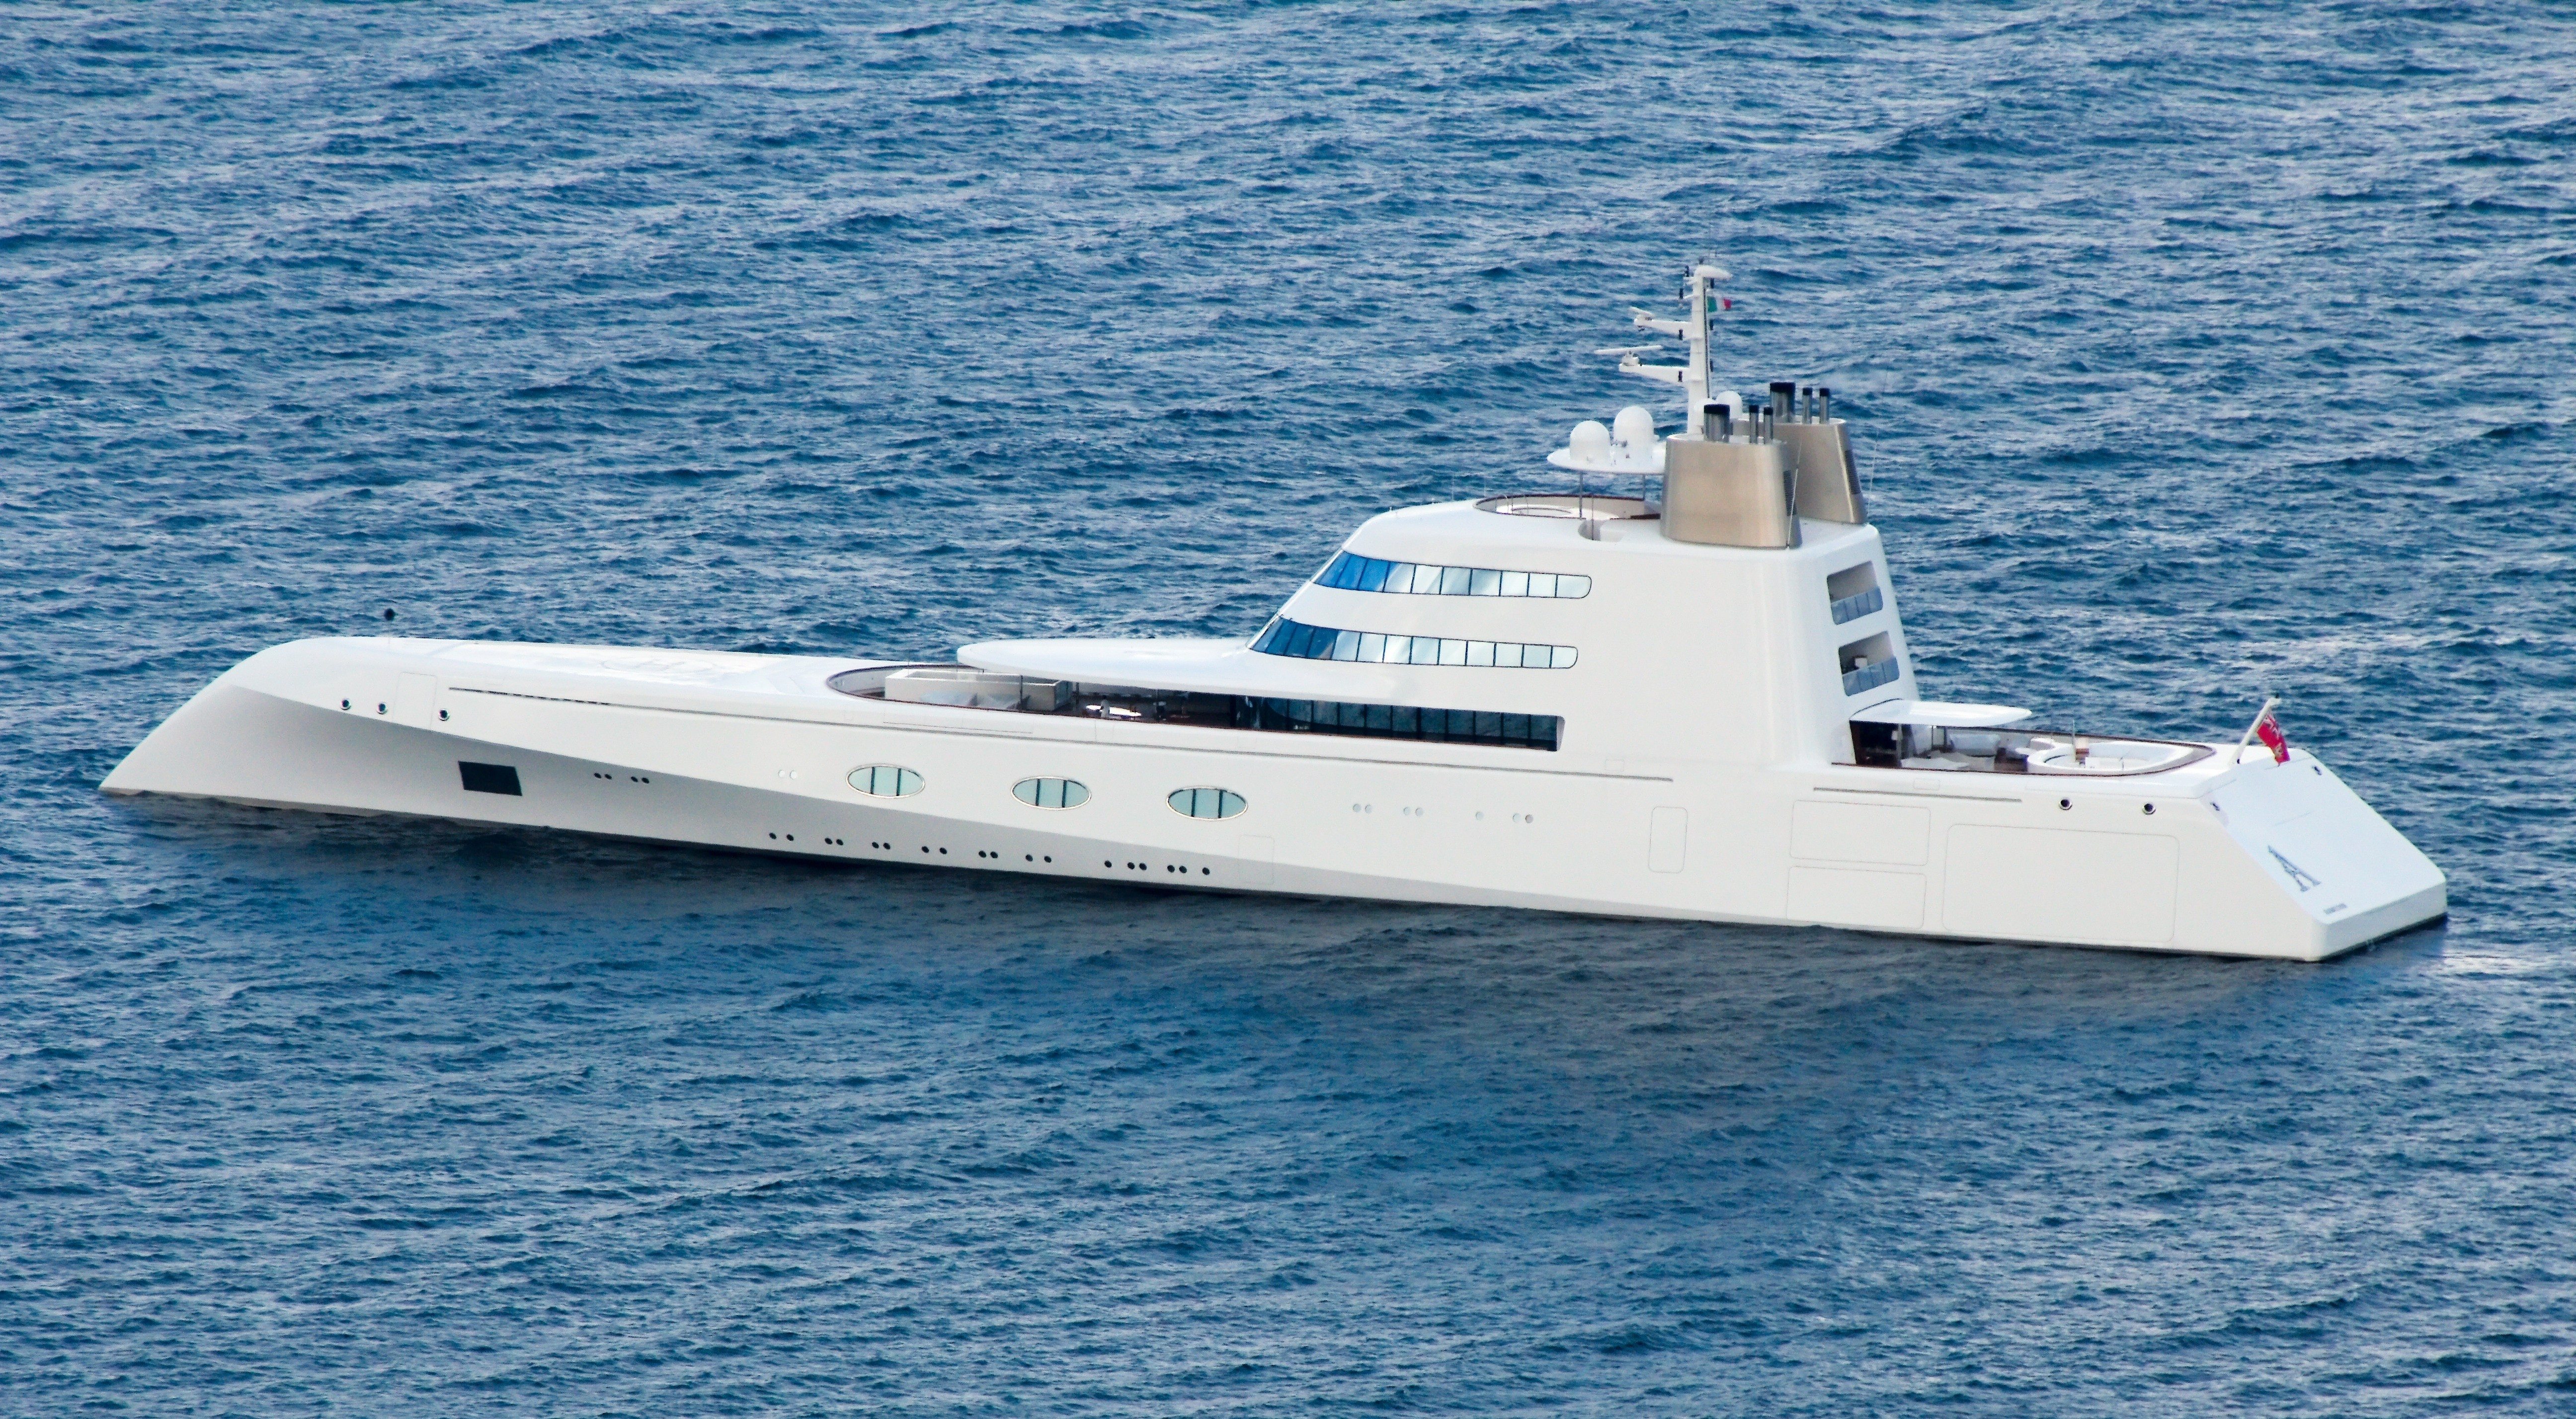 15 Most Expensive Yachts In The World And Their Owners5184 x 2856